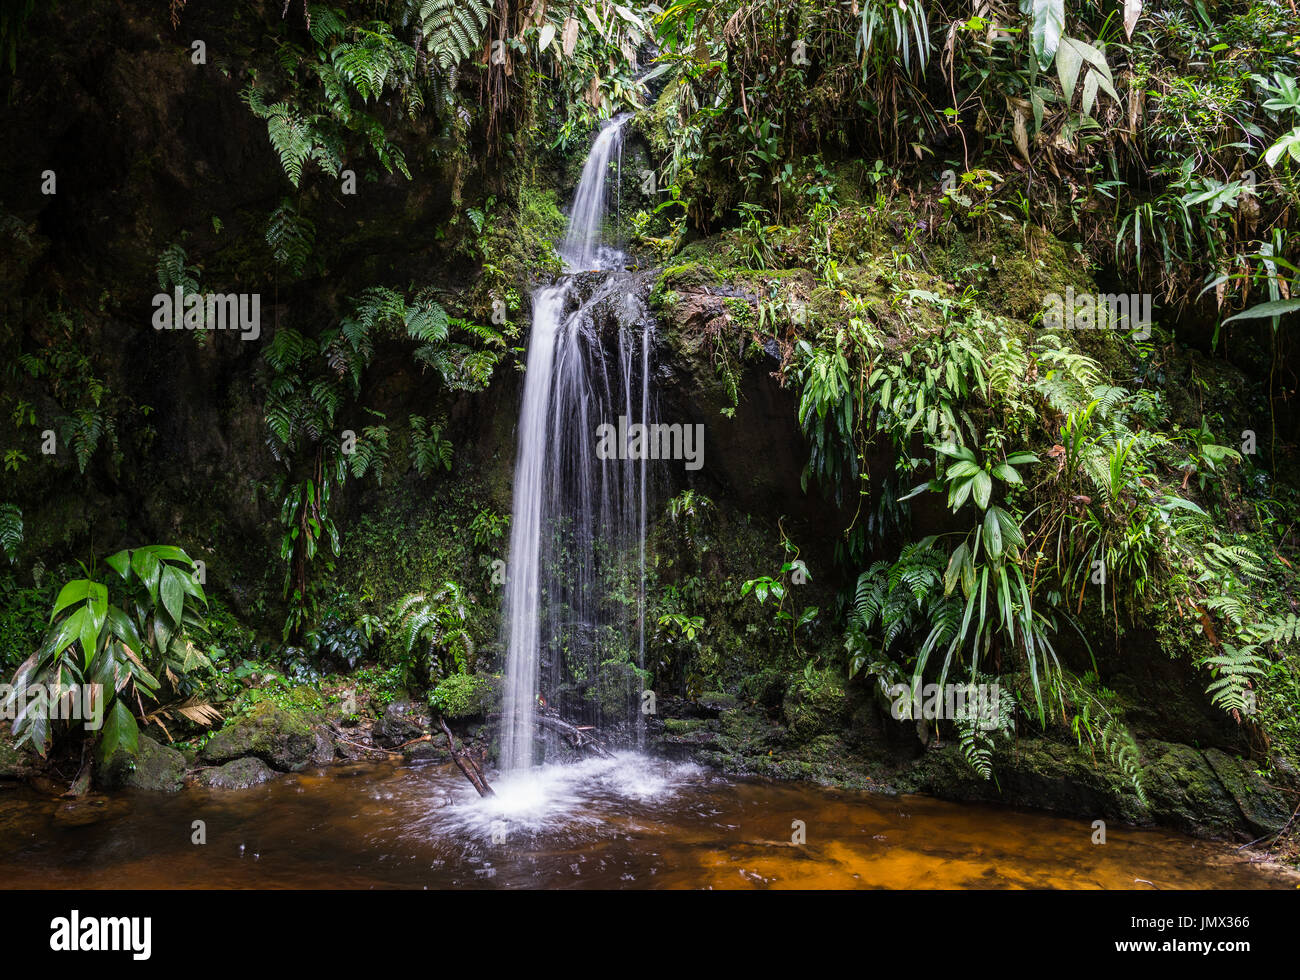 Waterfall in the lush green Cloud-forest of Andes Mountains. Colombia, South America. Stock Photo